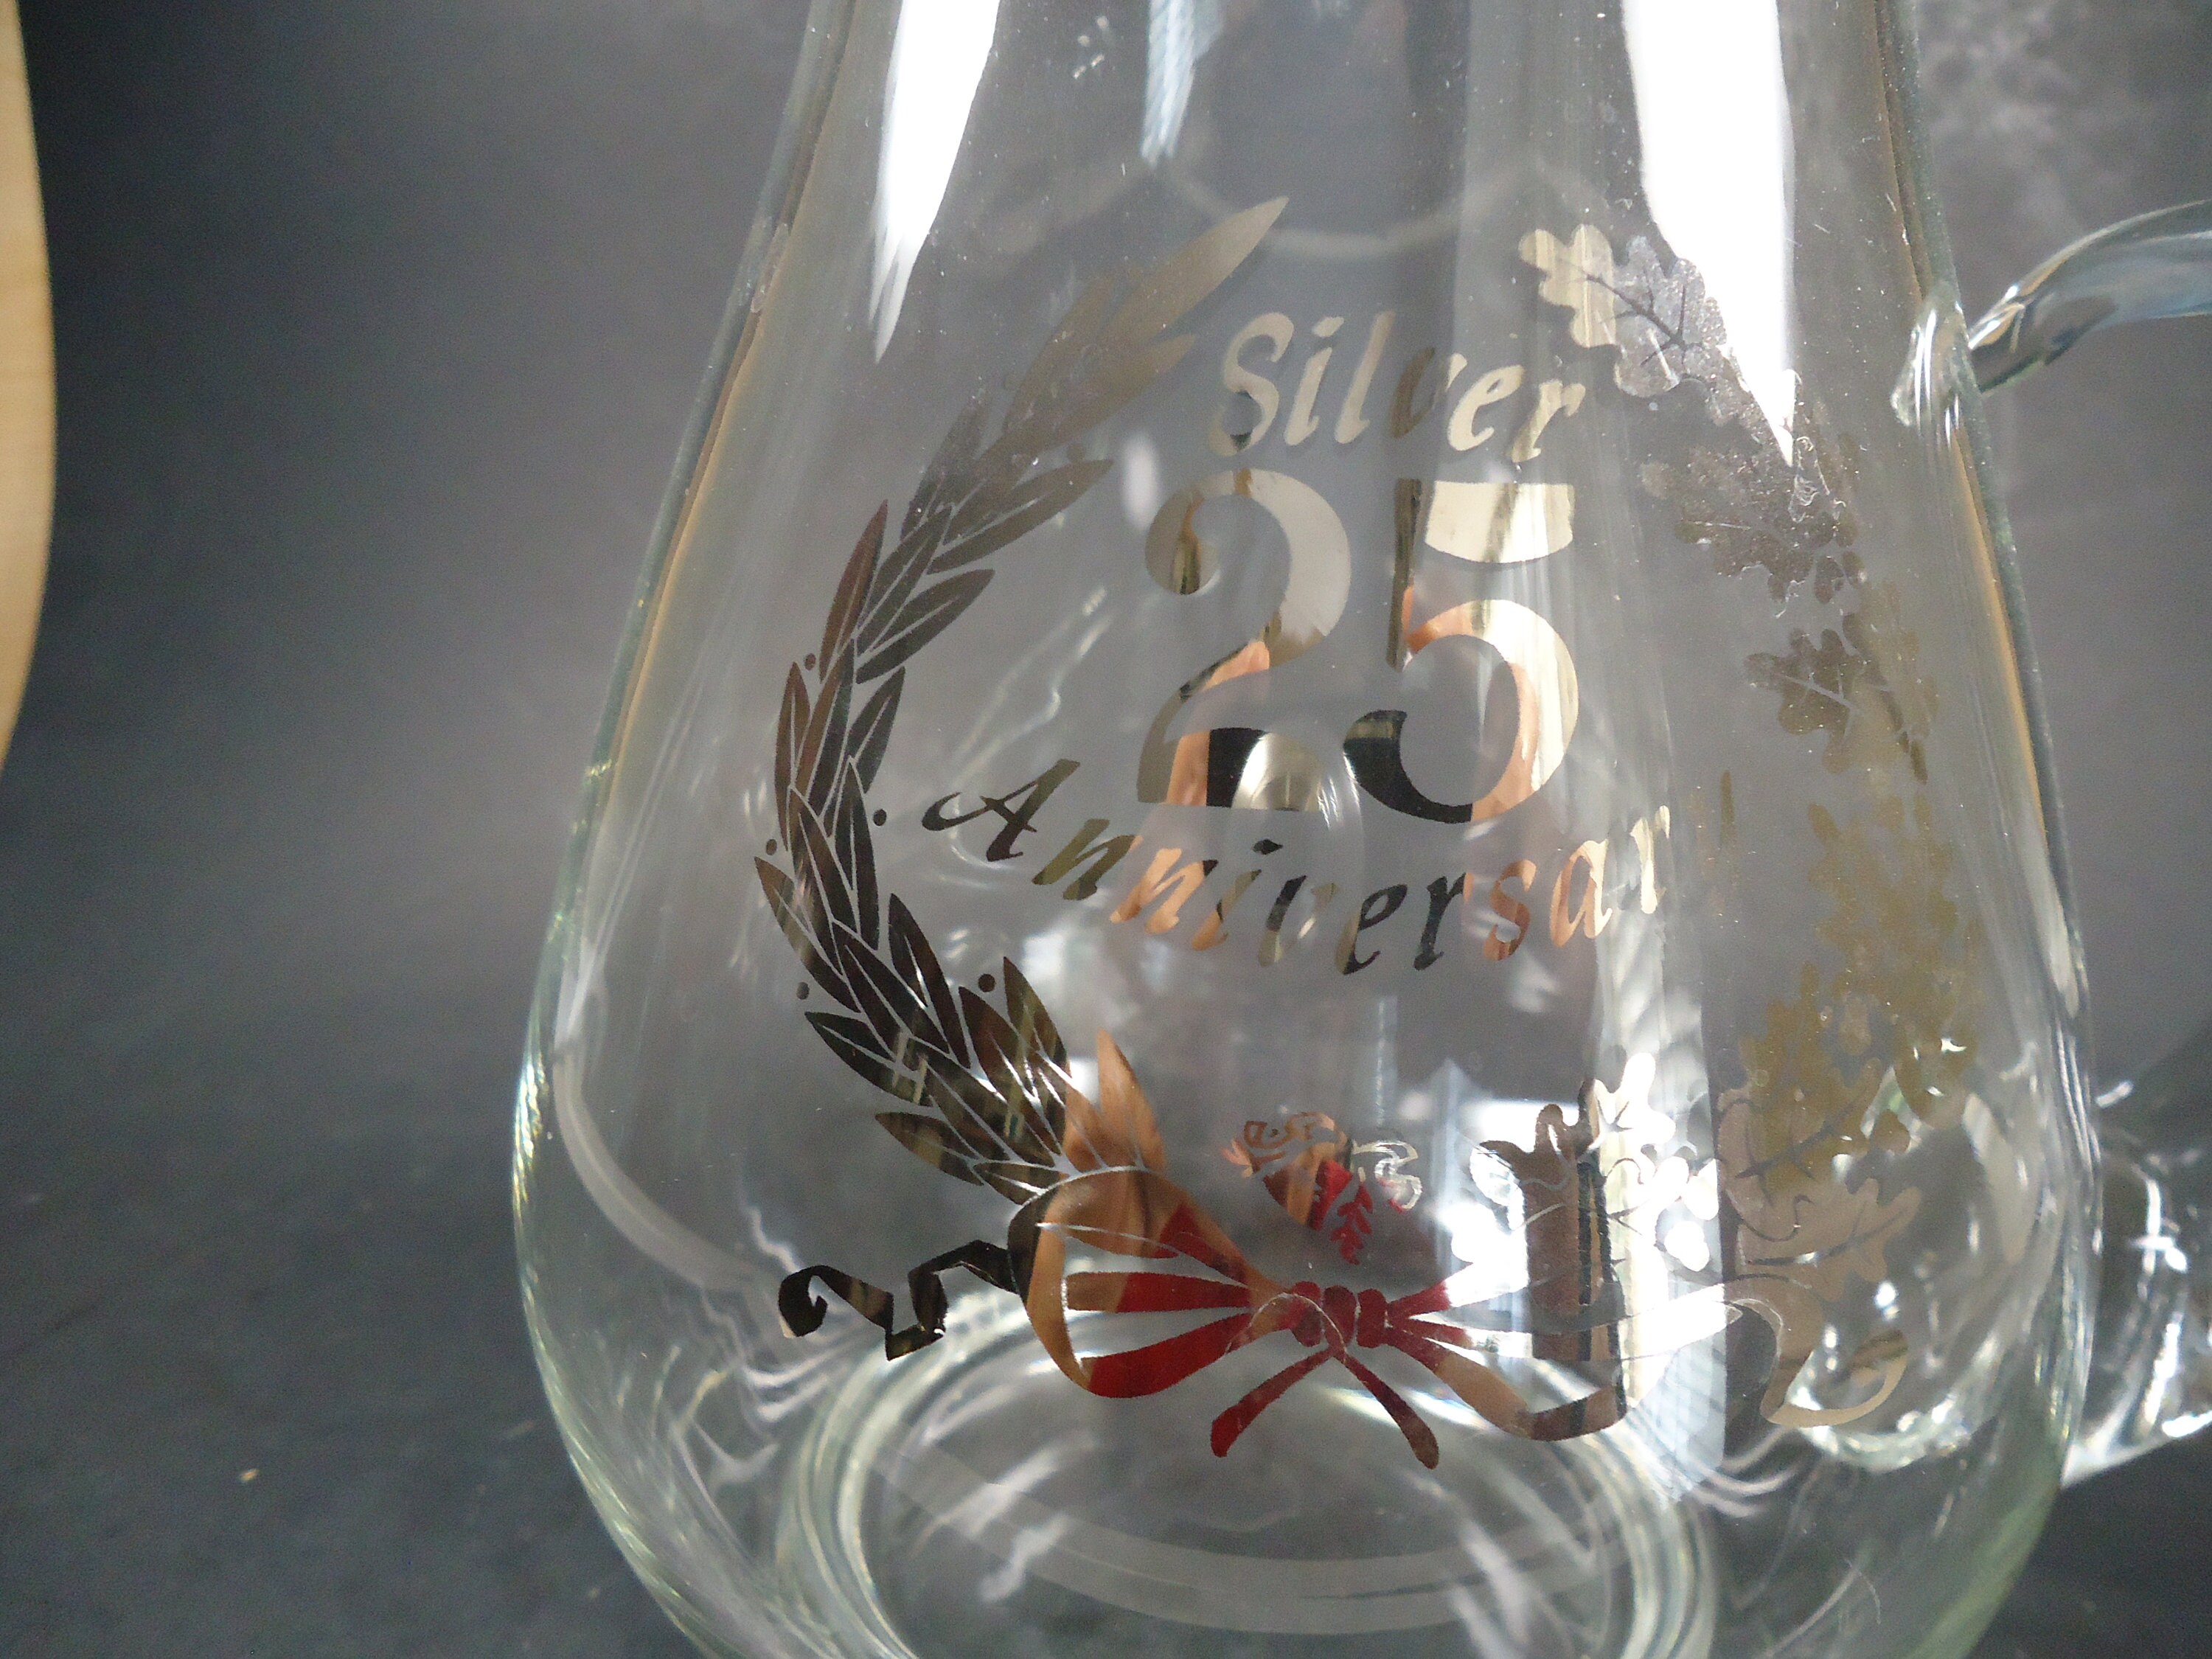 Small Glass Pitcher With Silver 25 Anniversary Emblem 